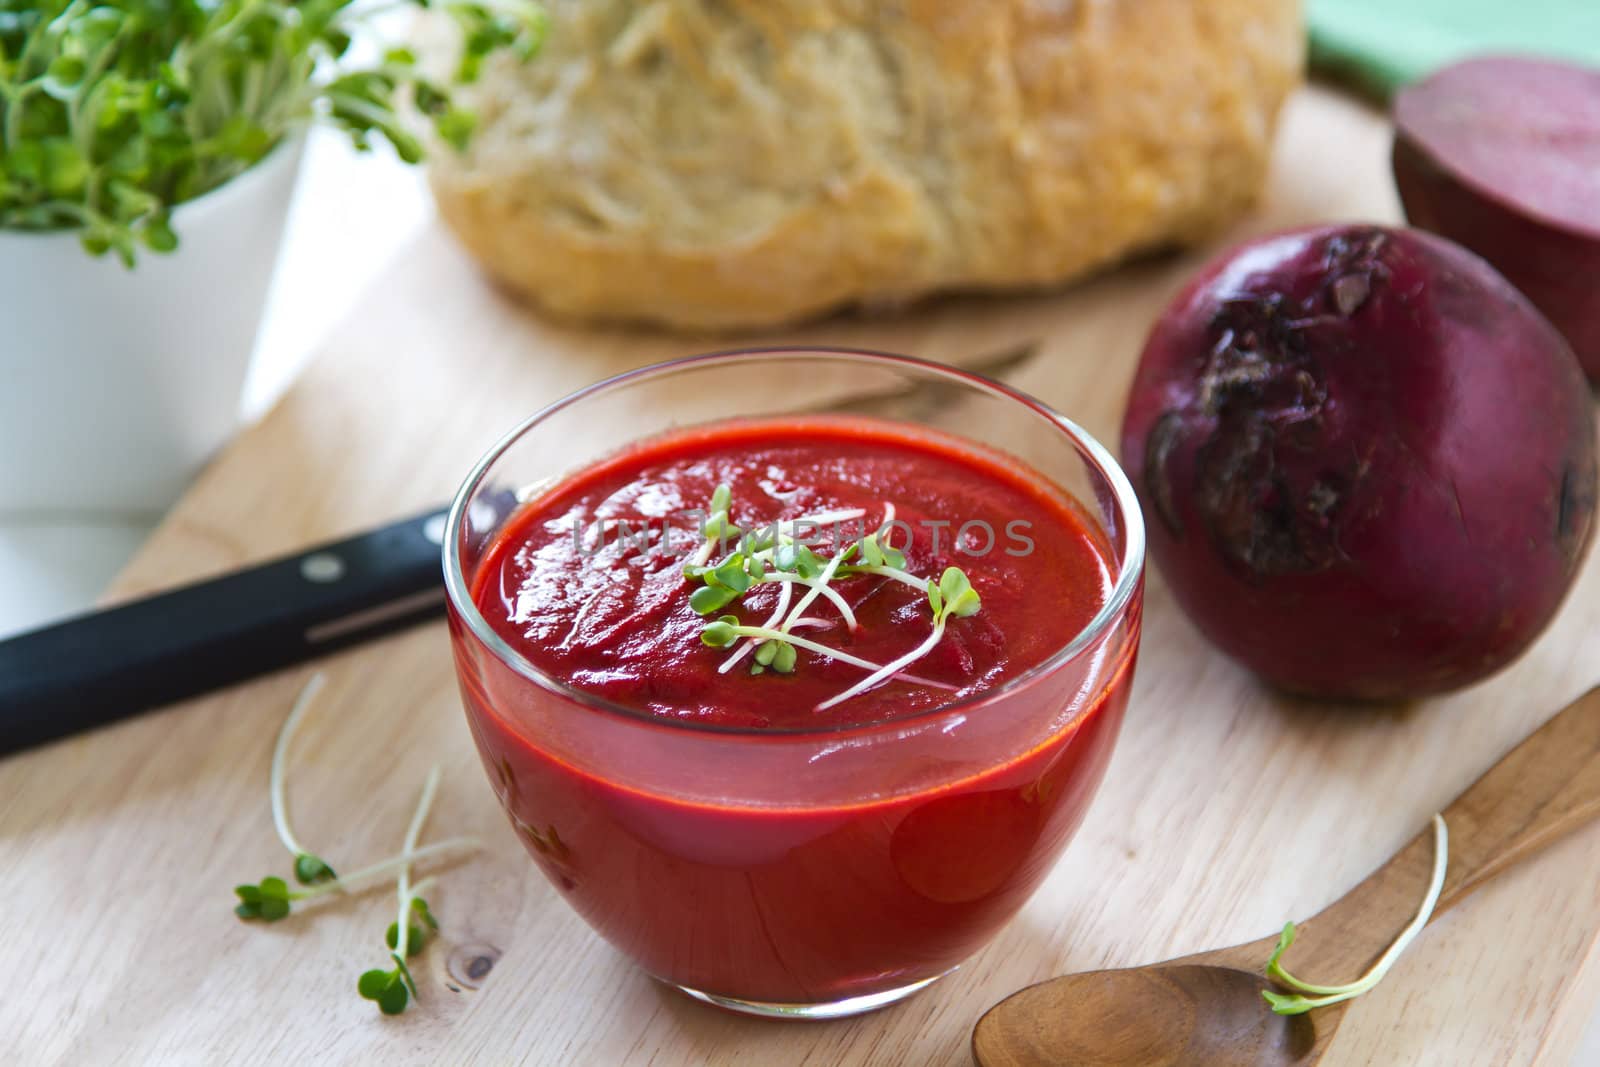 Beetroot with carrot and tomato soup